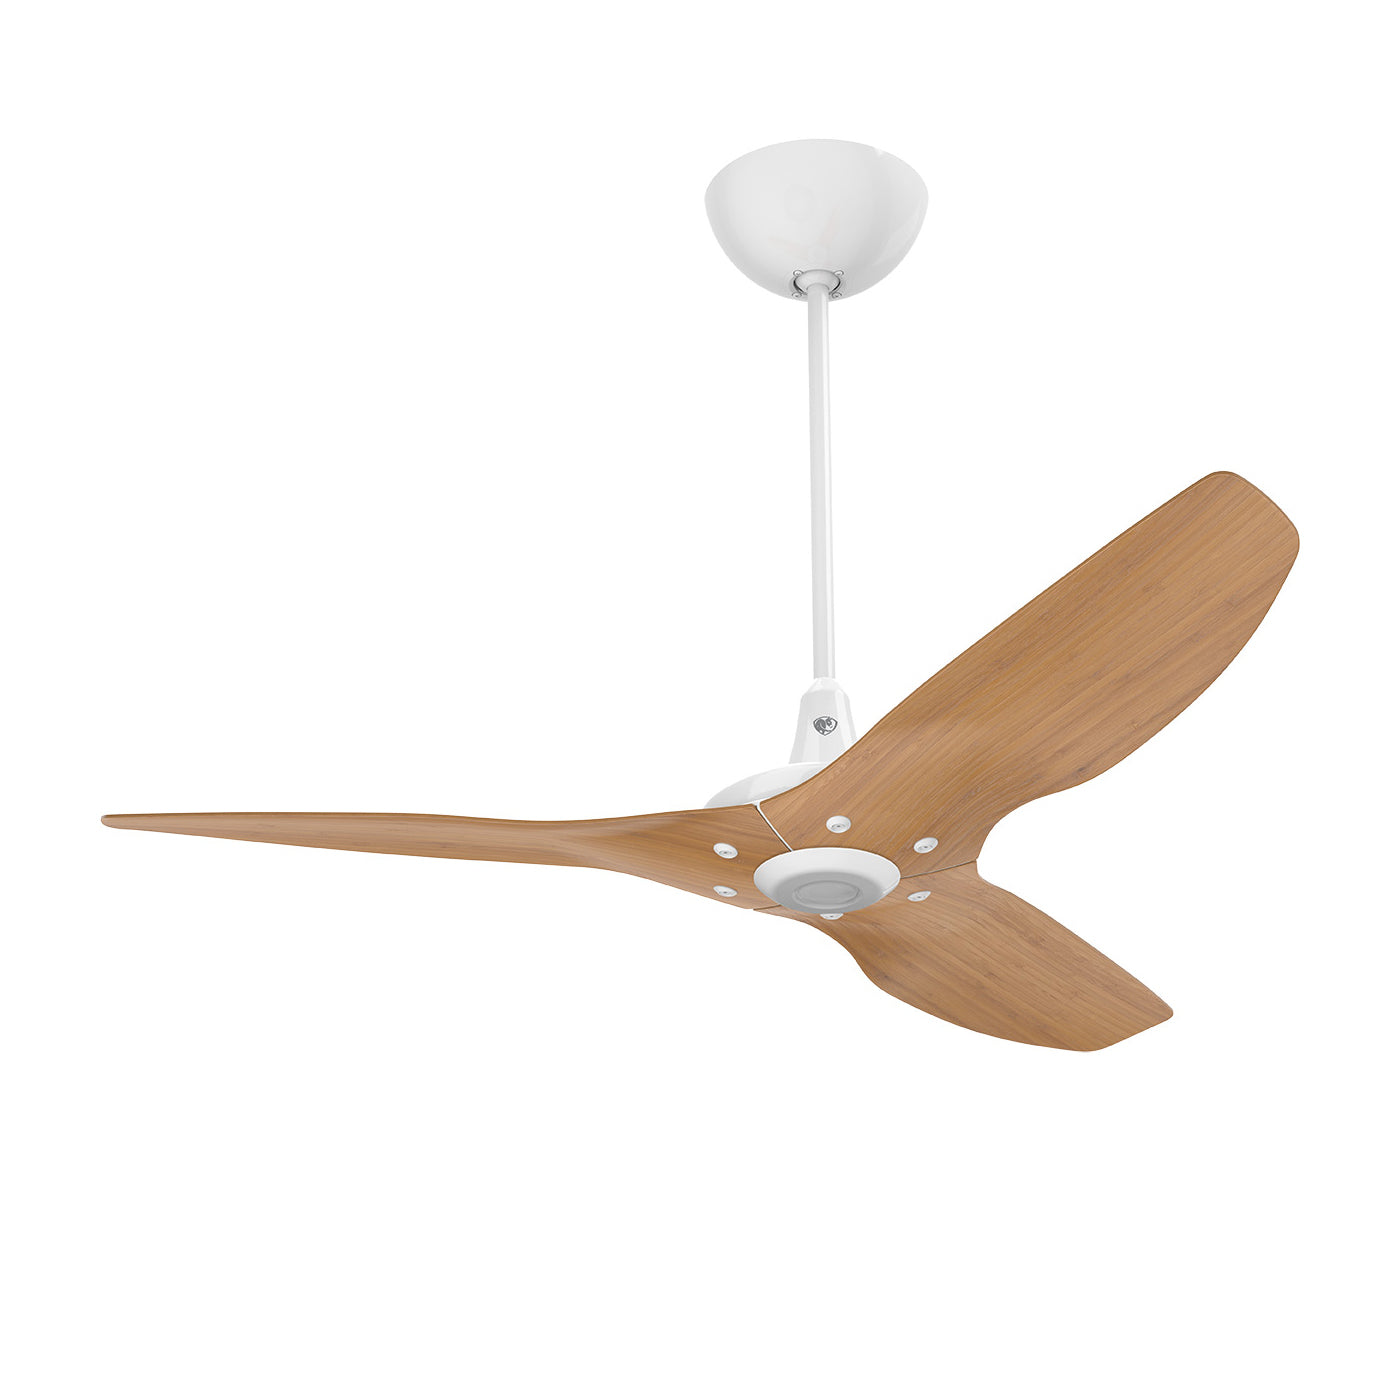 Big Ass Fans Haiku 52" Ceiling Fan with Caramel Bamboo Blades and White Finish, Downrod 12", Indoors